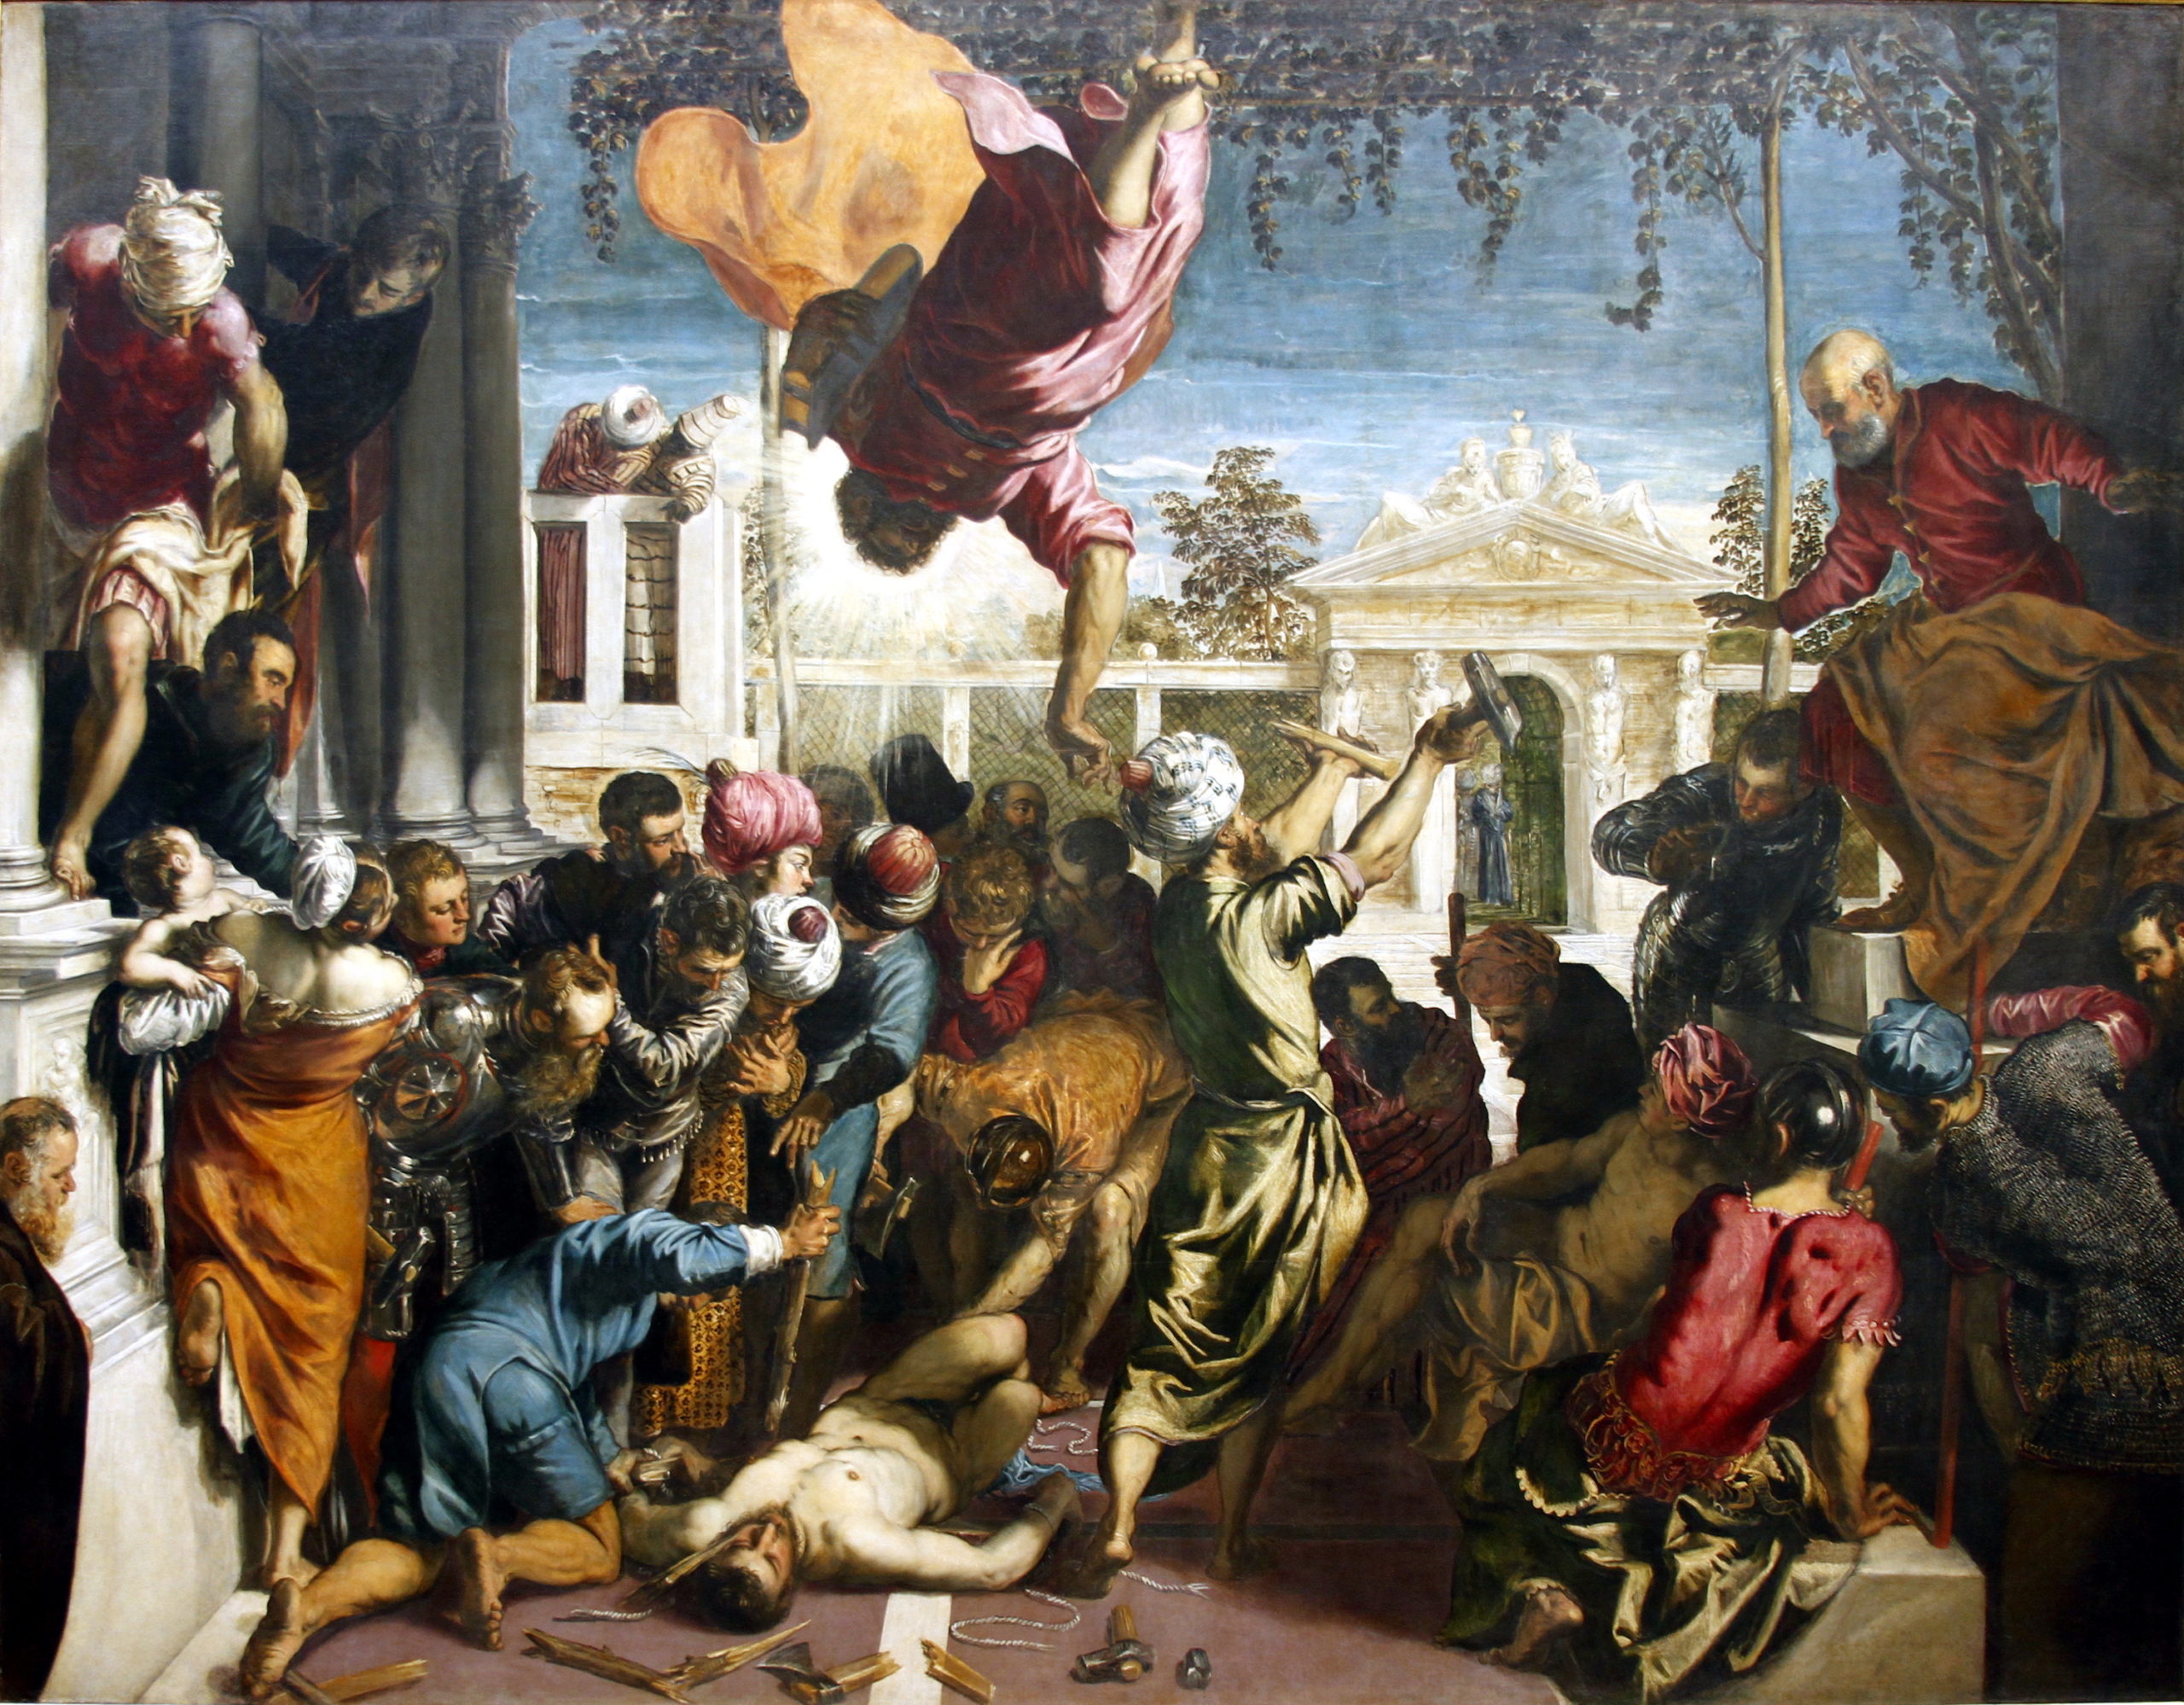 Tintoretto at 500